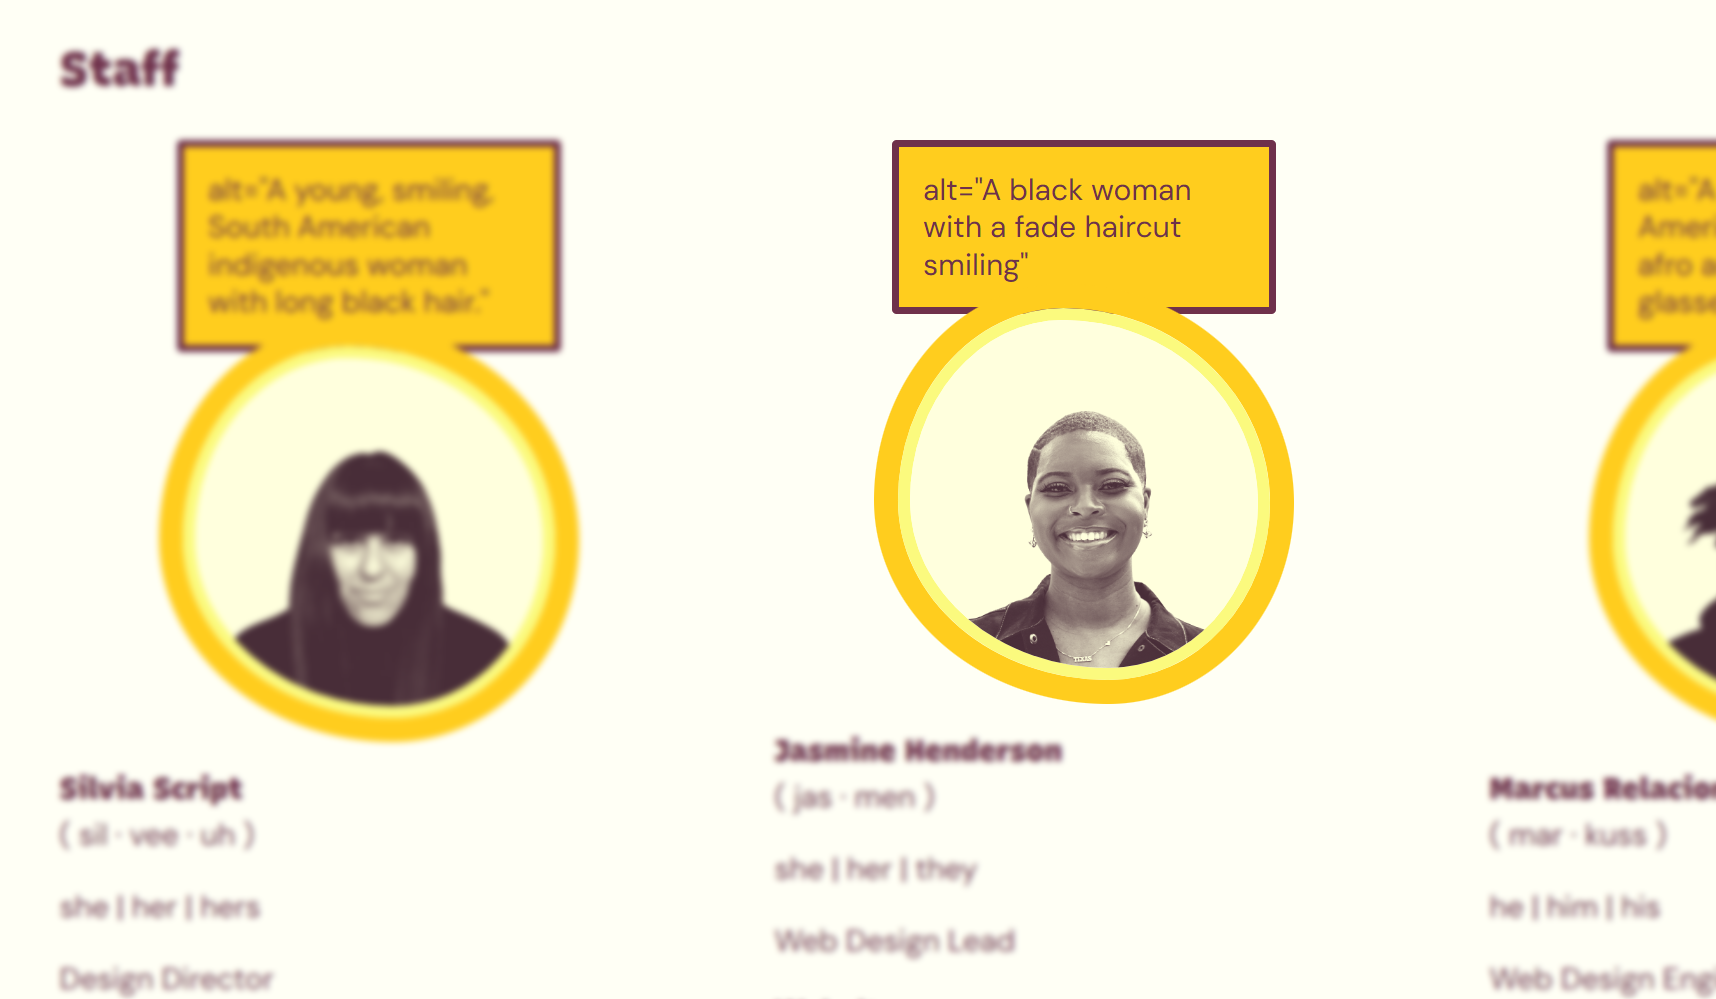 Three staff of color on the 2022 website have alt text describing their race.